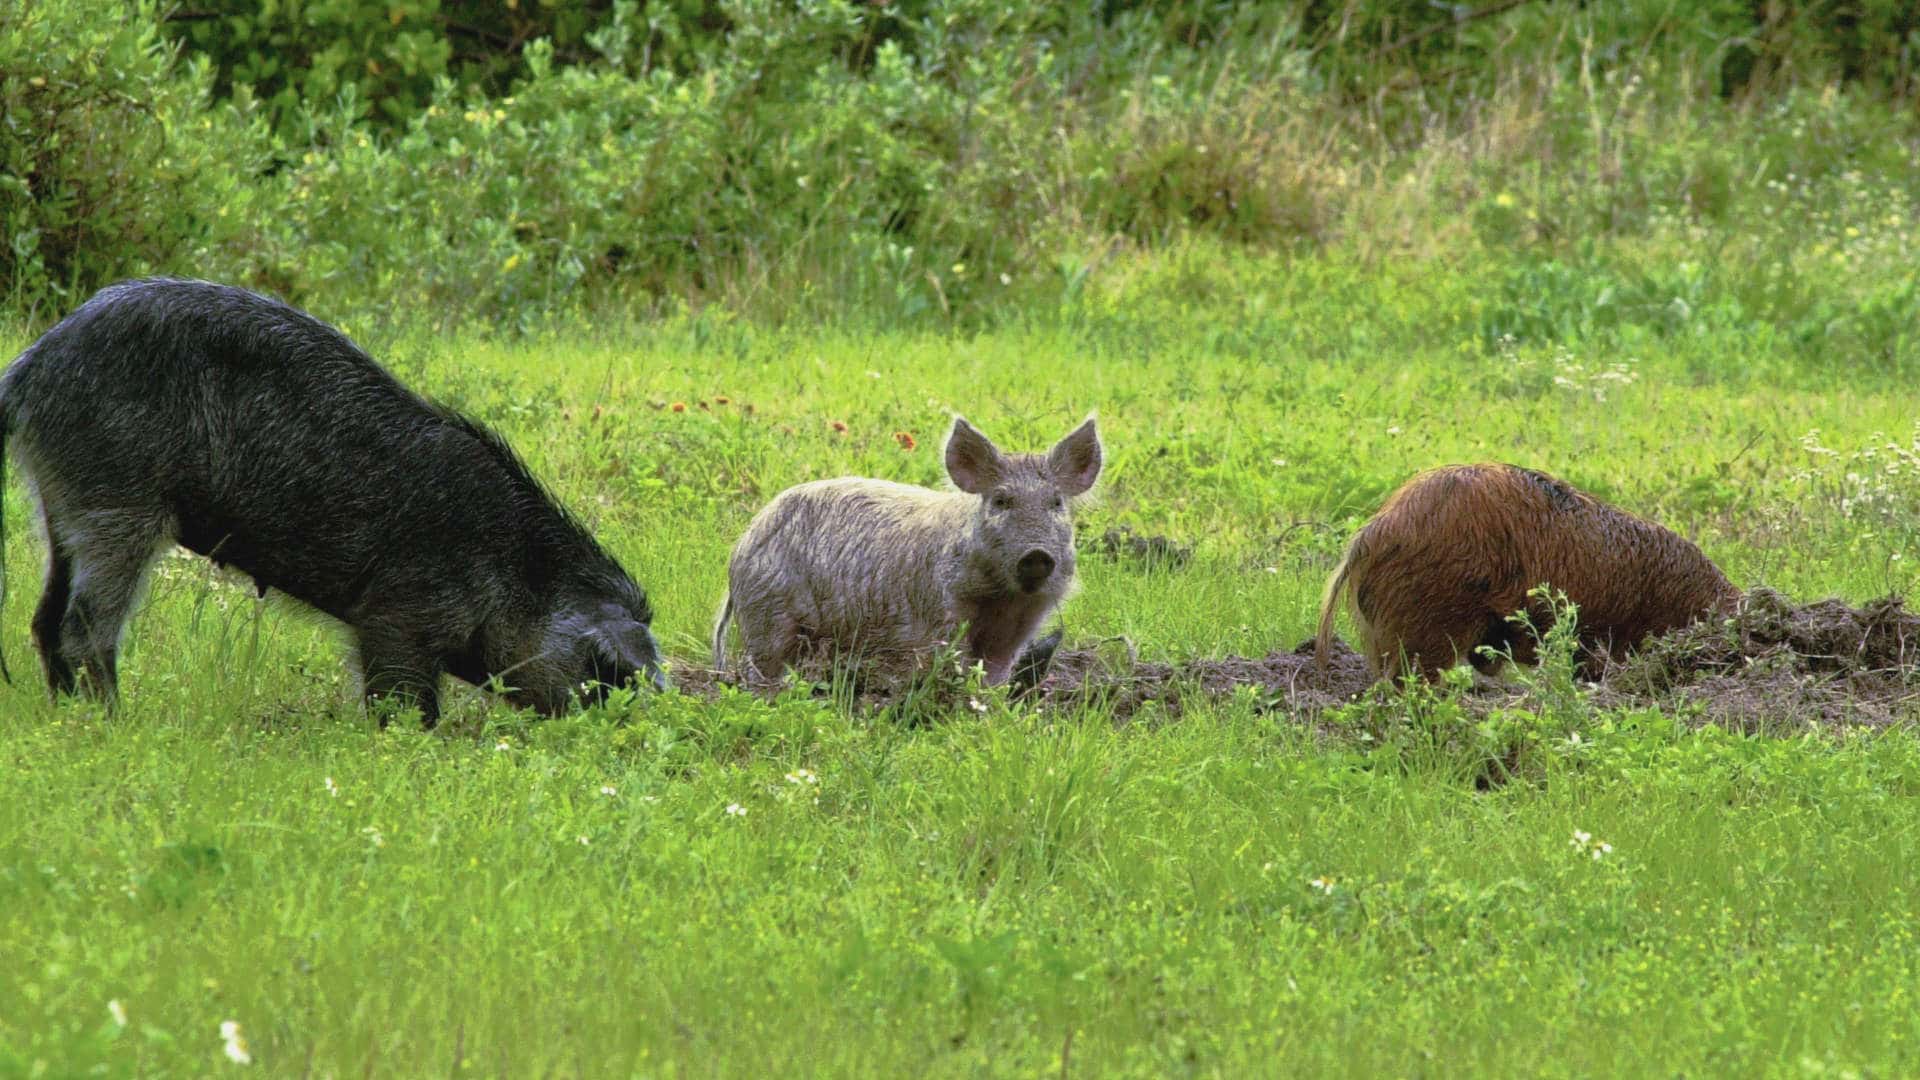 Feral swine, also called wild pigs, destroy native plants, animals, and precious habitats.